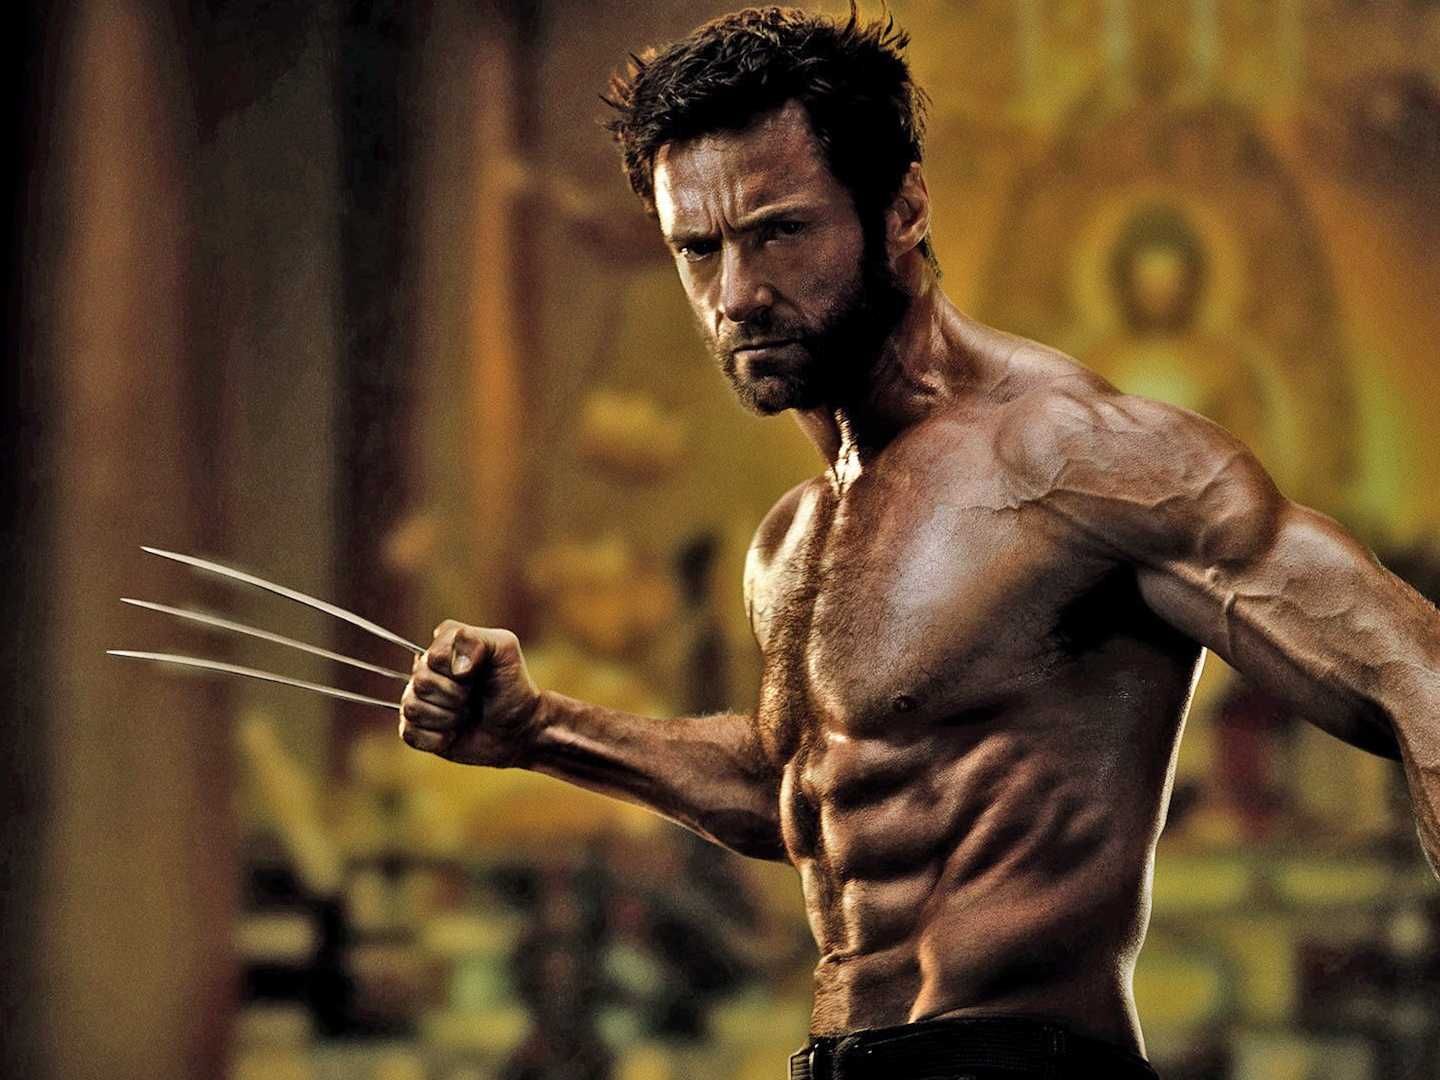 The Wolverine sequel: David James Kelly to pen it